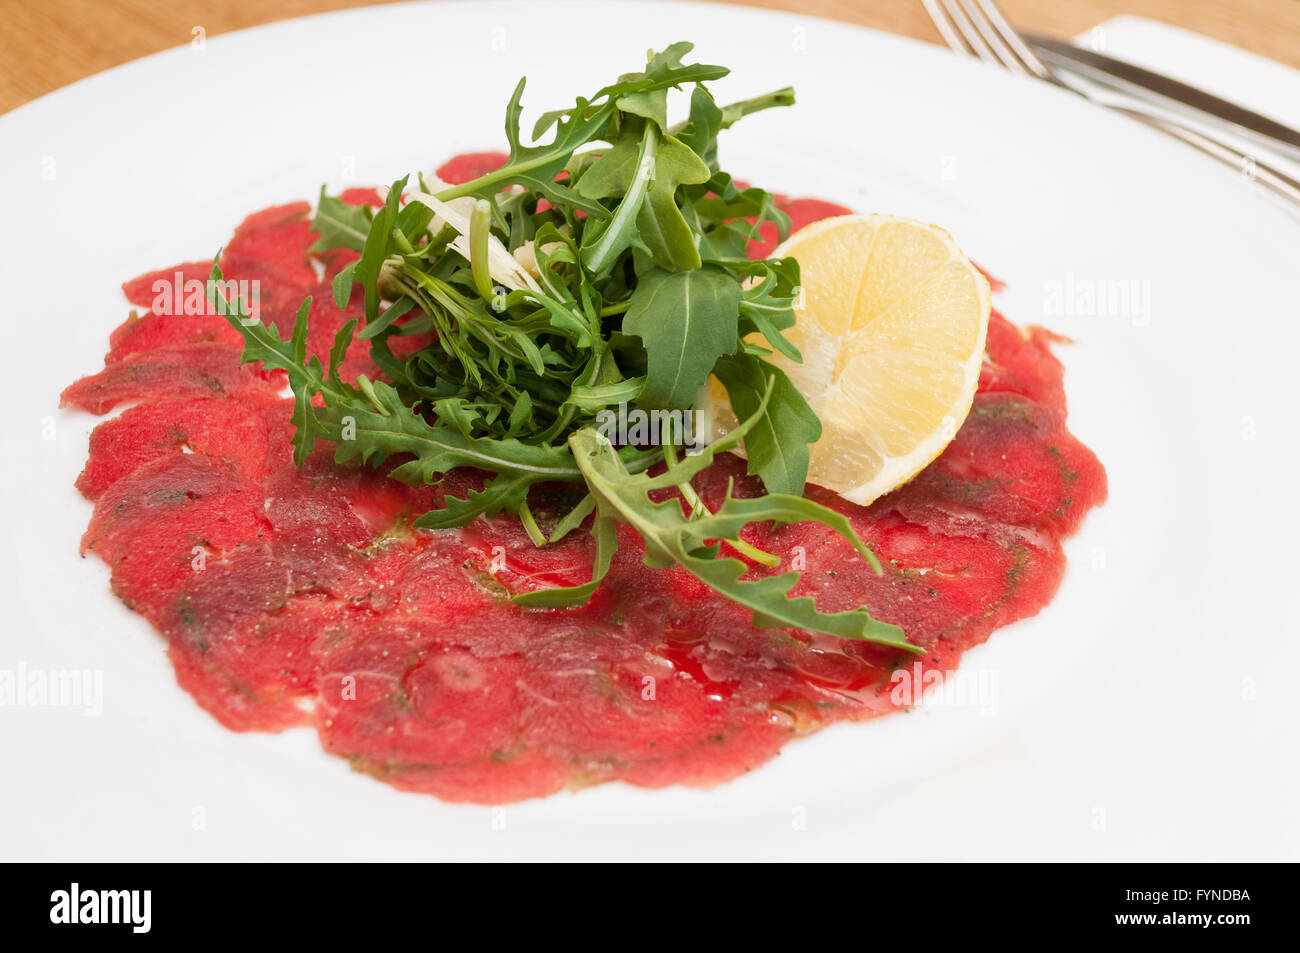 Beef Carpaccio with Parmesan Cheese, Lemon and Wild Rocket - Shallow Depth of Field Stock Photo